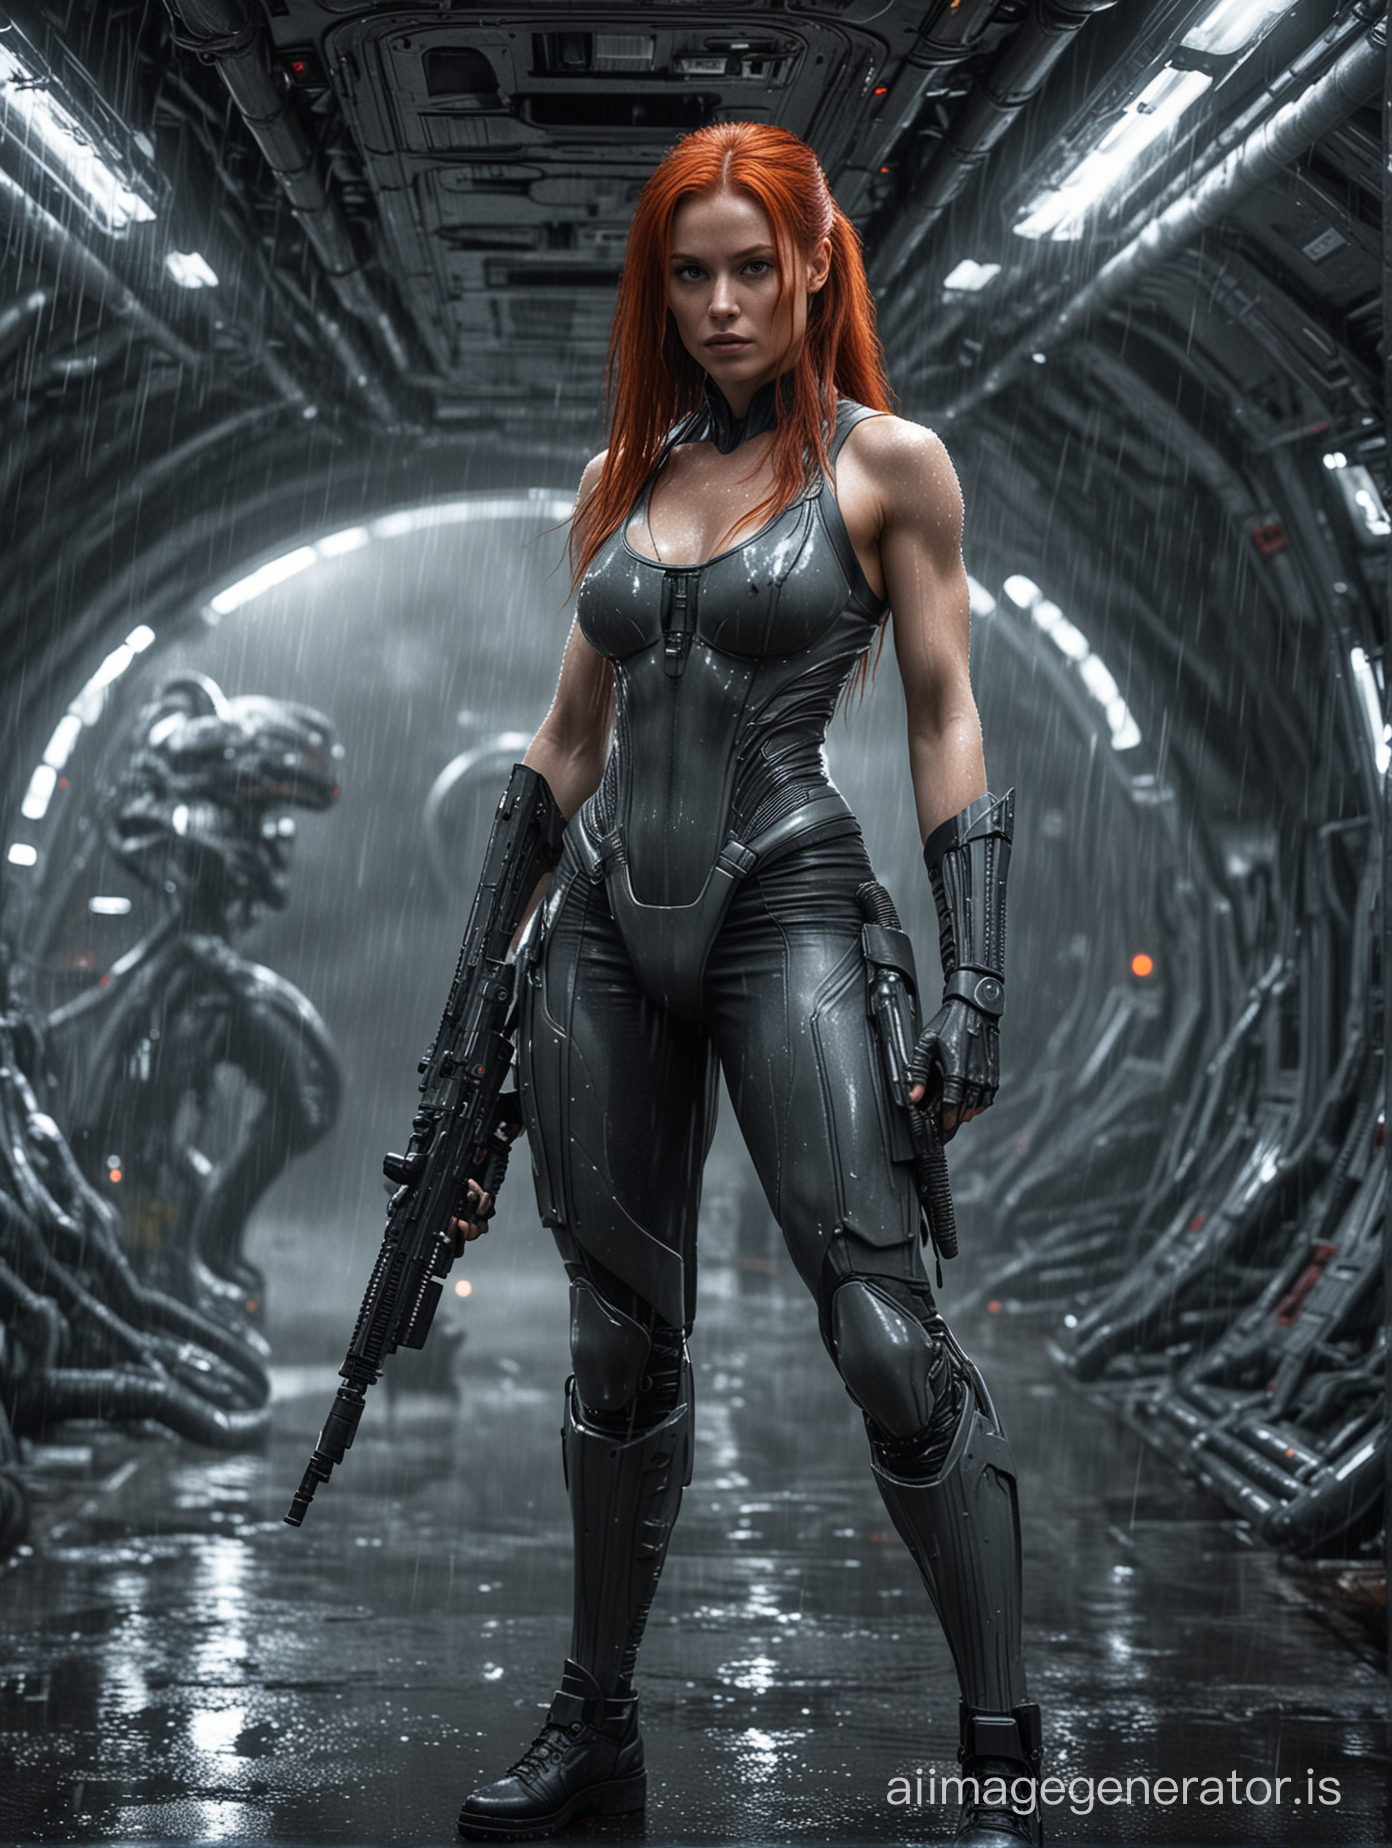 Alien movie type movie poster. Thin skinny tone muscular sexy woman in the rain. full body pose. very long red hair in a ponytail. large firm boobs grey clothing laser rifle. shooting an alien xenomorph. inside sci-fy spaceship background.